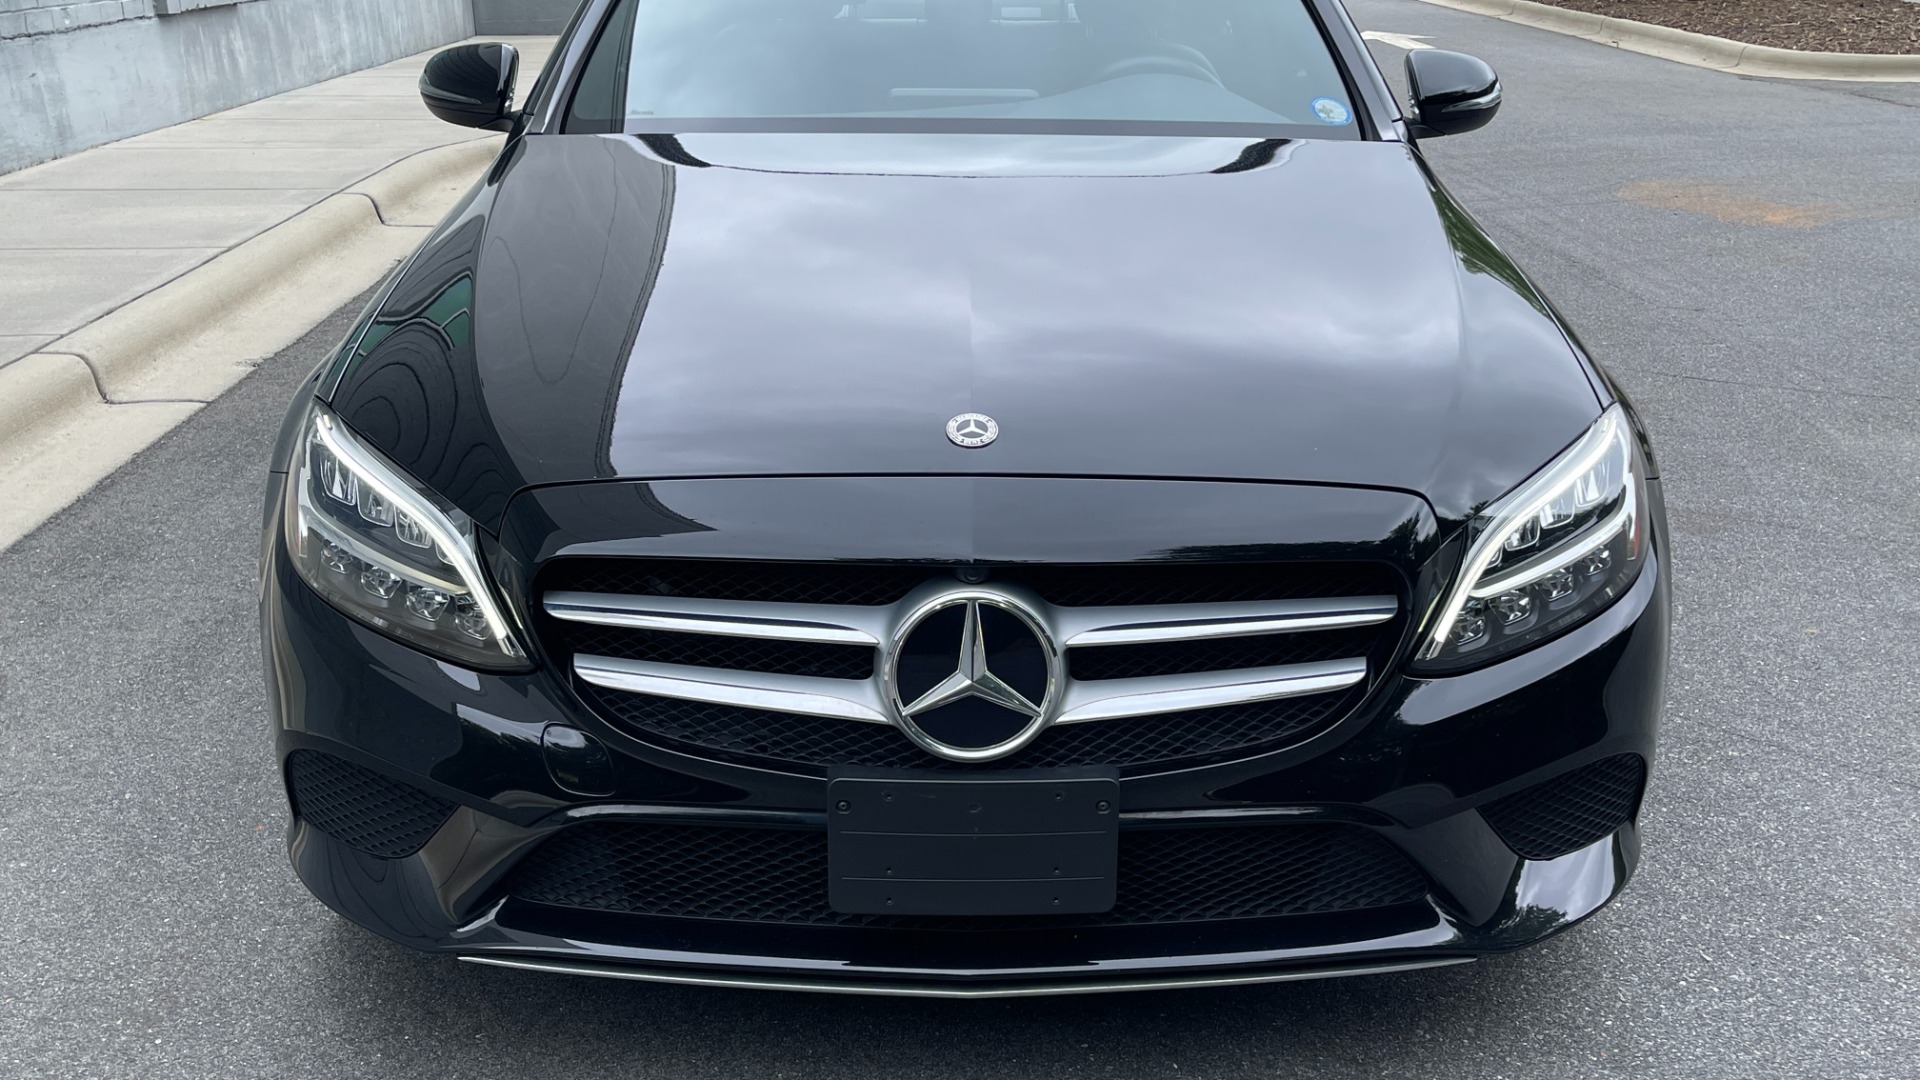 Used 2019 Mercedes-Benz C-Class C 300 / 4MATIC / BURMESTER SOUND / PANORAMIC ROOF / PREMIUM / MULTIMEDIA for sale Sold at Formula Imports in Charlotte NC 28227 3